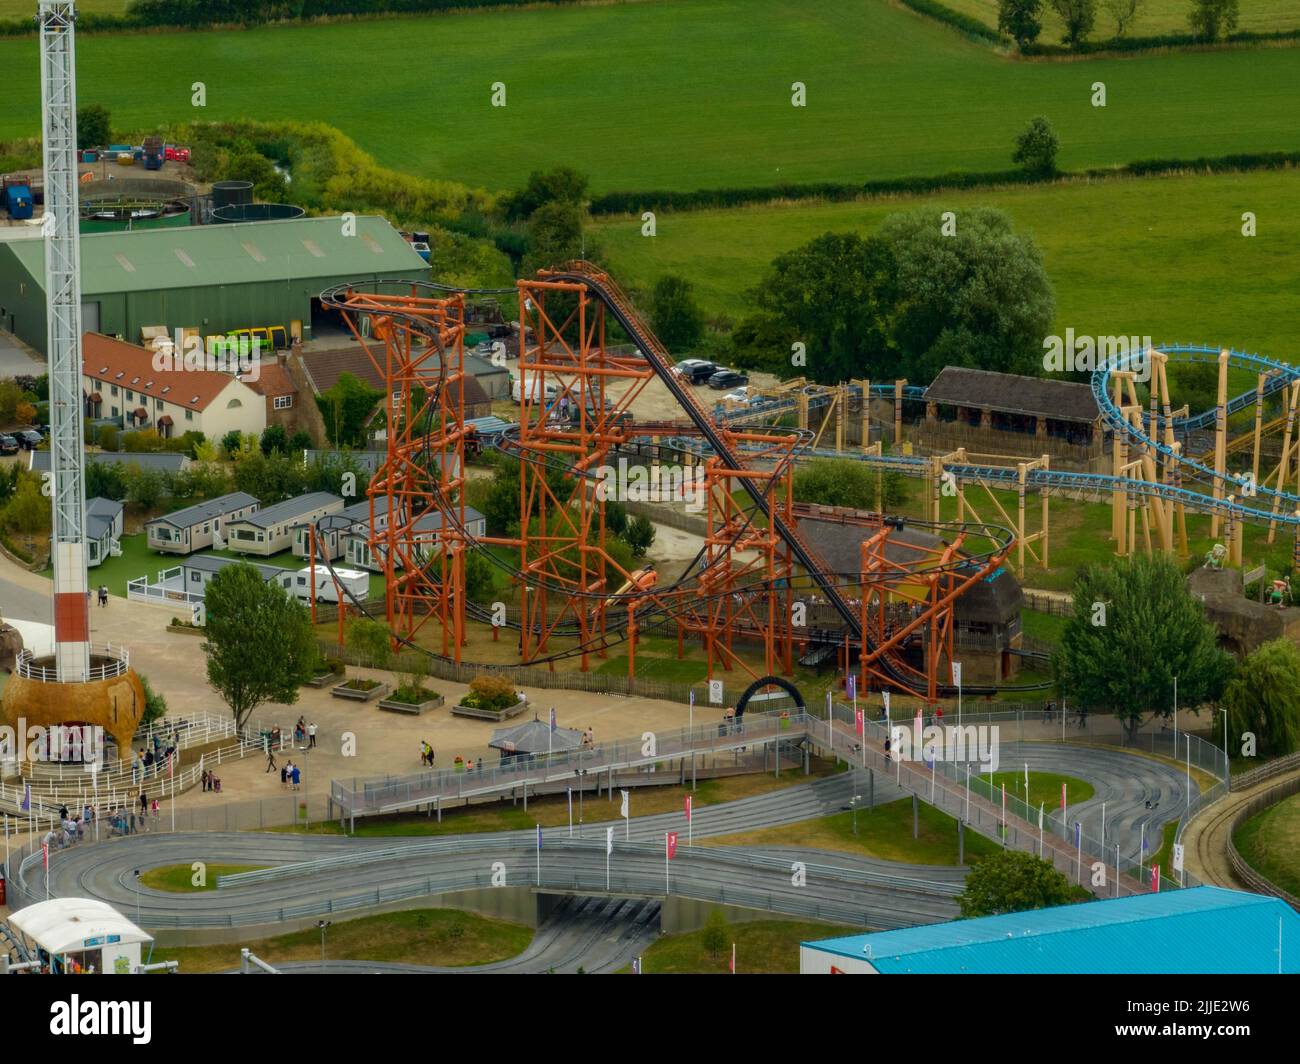 A Unique View from the Air of Sik  the brand new 10 Looping Roller coaster and all the other rides at  Flamingo Land aerial birds eye view rollercoast Stock Photo